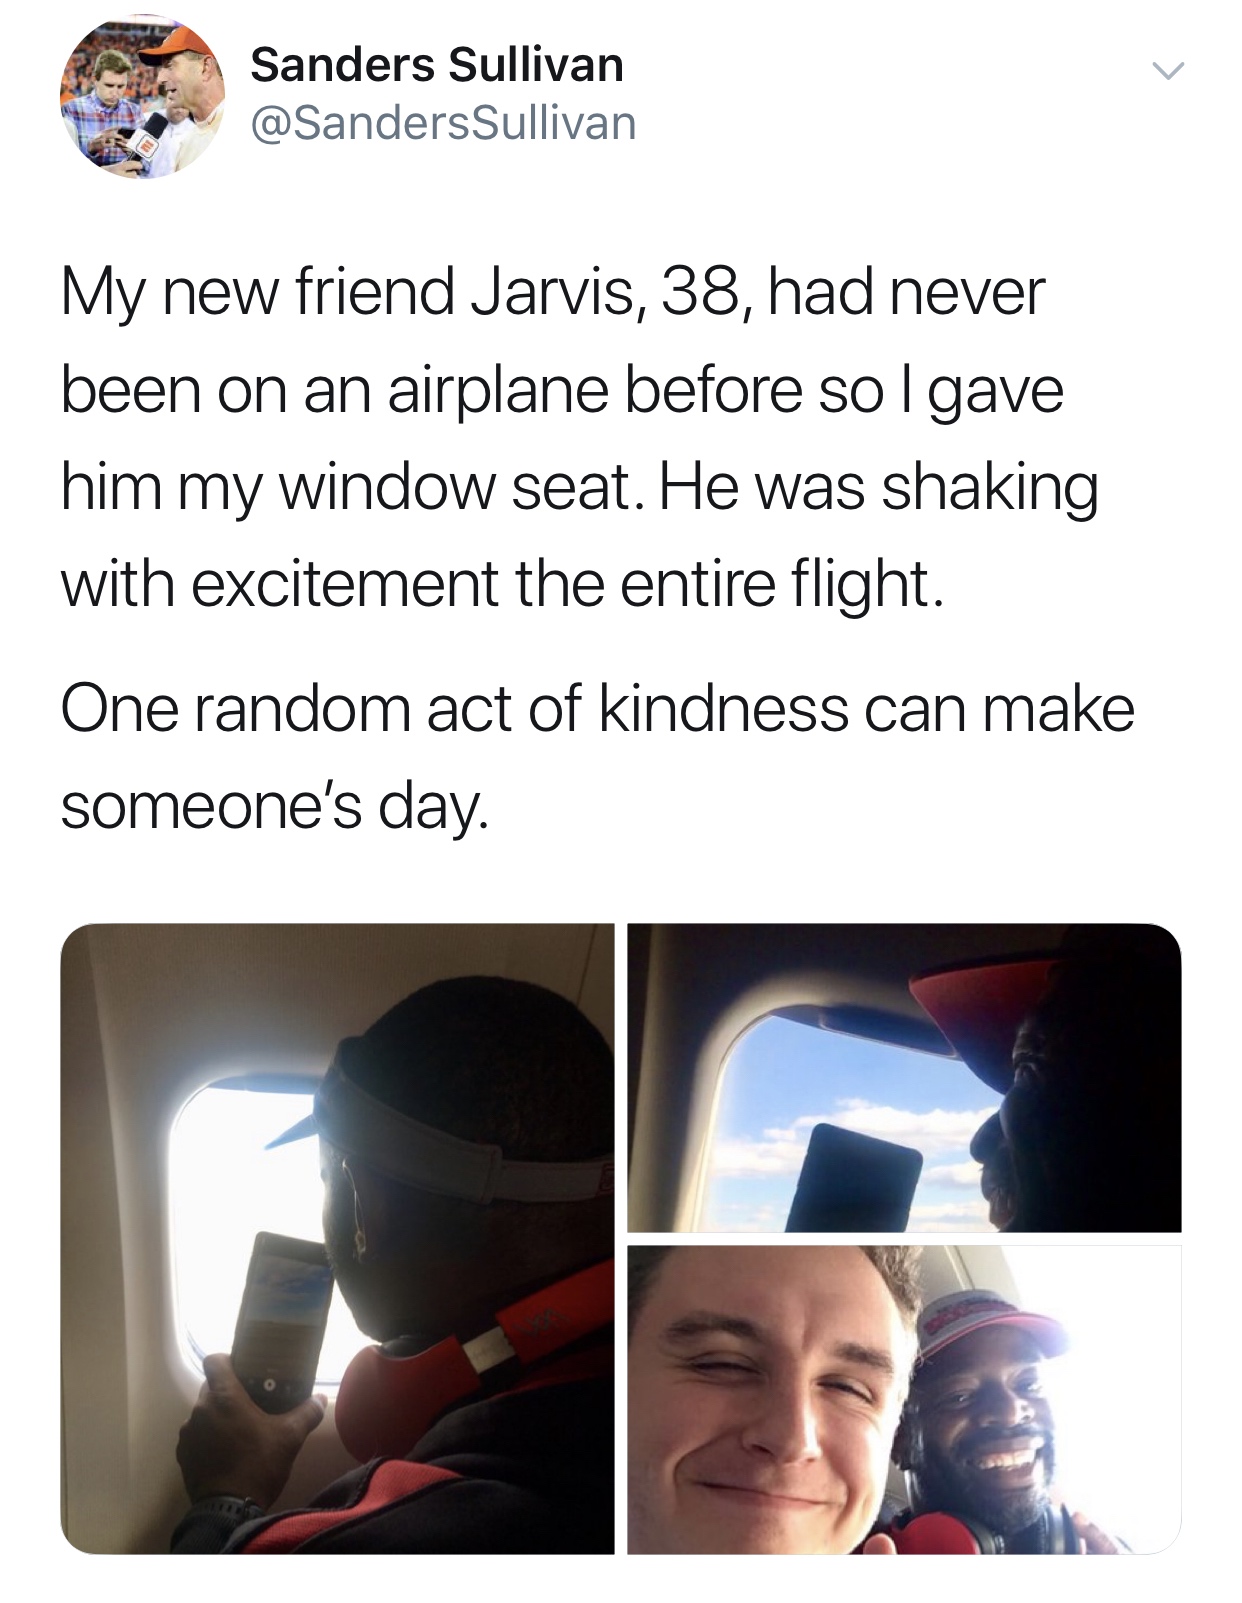 media - Sanders Sullivan Sullivan My new friend Jarvis, 38, had never been on an airplane before sol gave him my window seat. He was shaking with excitement the entire flight. One random act of kindness can make someone's day.